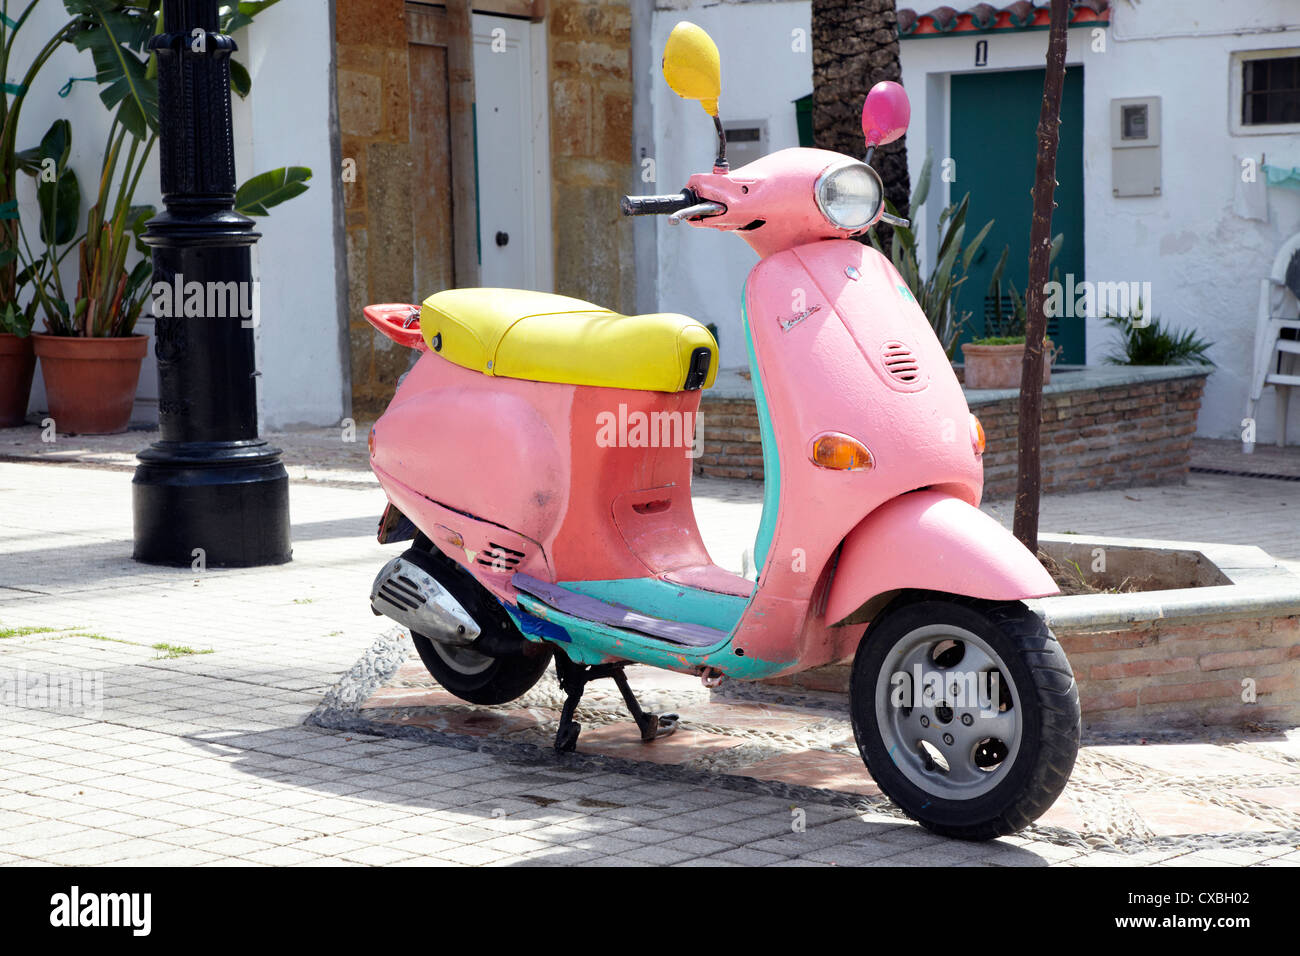 Vespa Scooter High Resolution Stock Photography and Images - Alamy